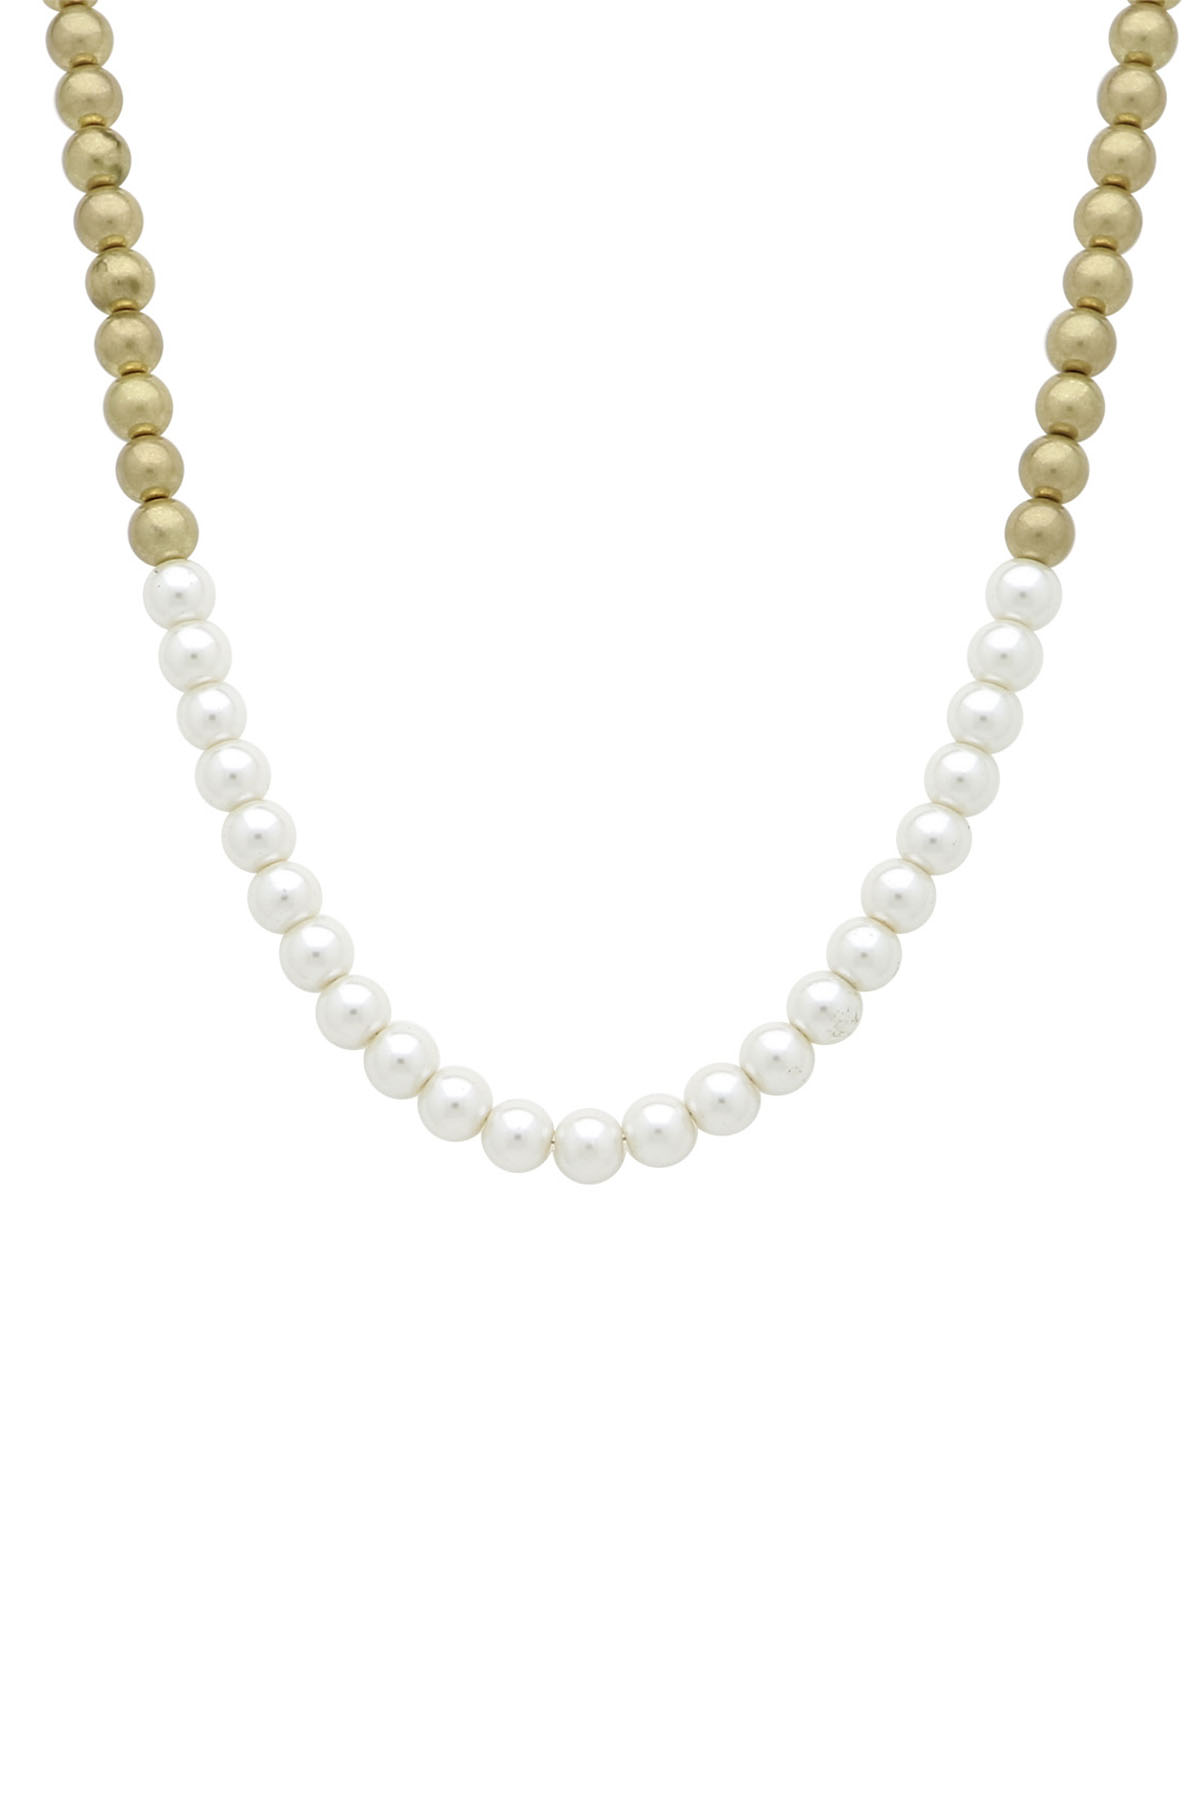 PEARL AND CCB NECKLACE